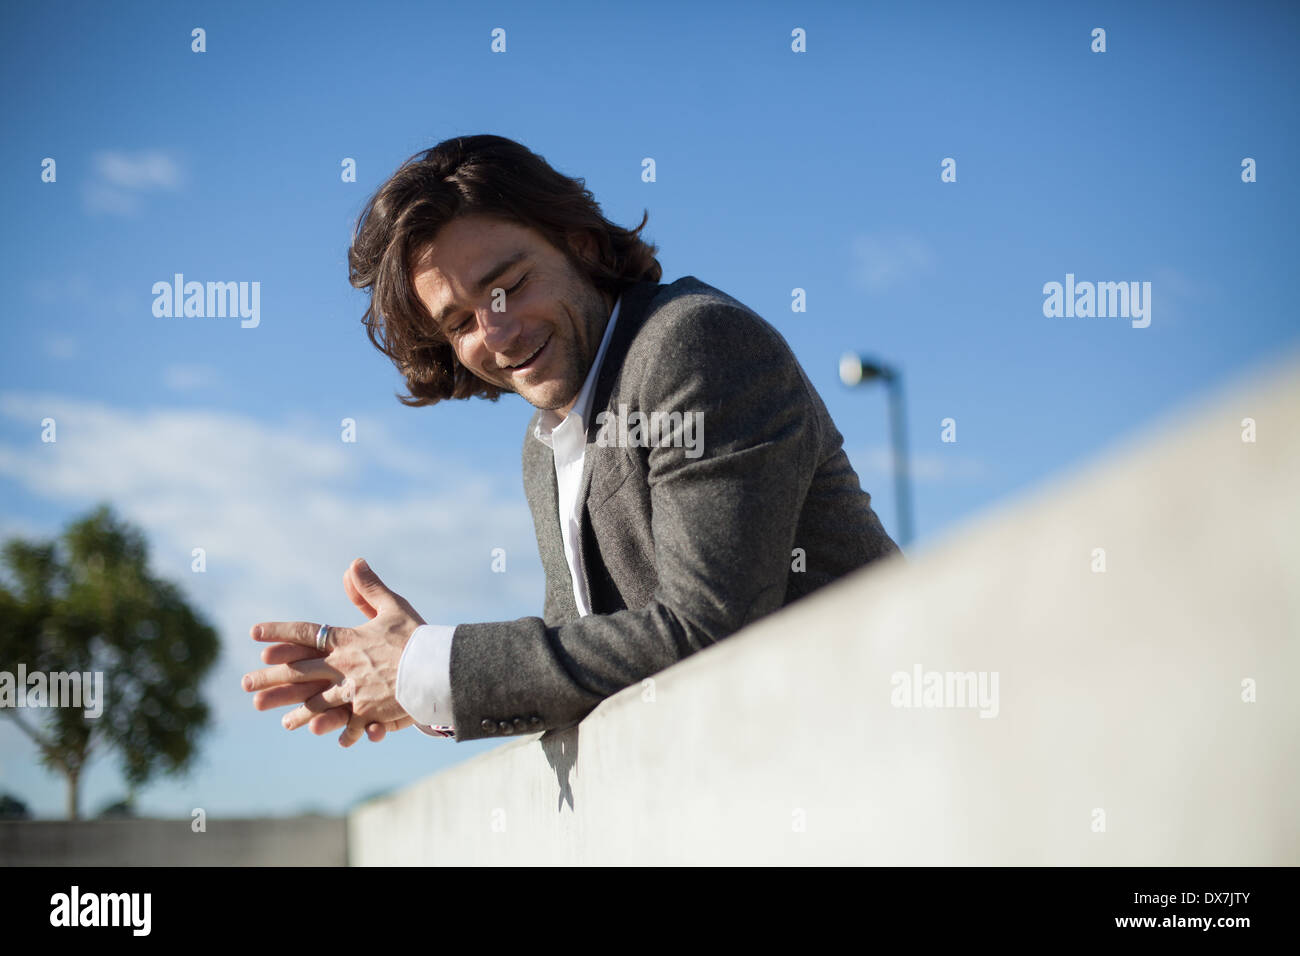 A young male model leaning against a wall with a blue sky behind him Stock Photo